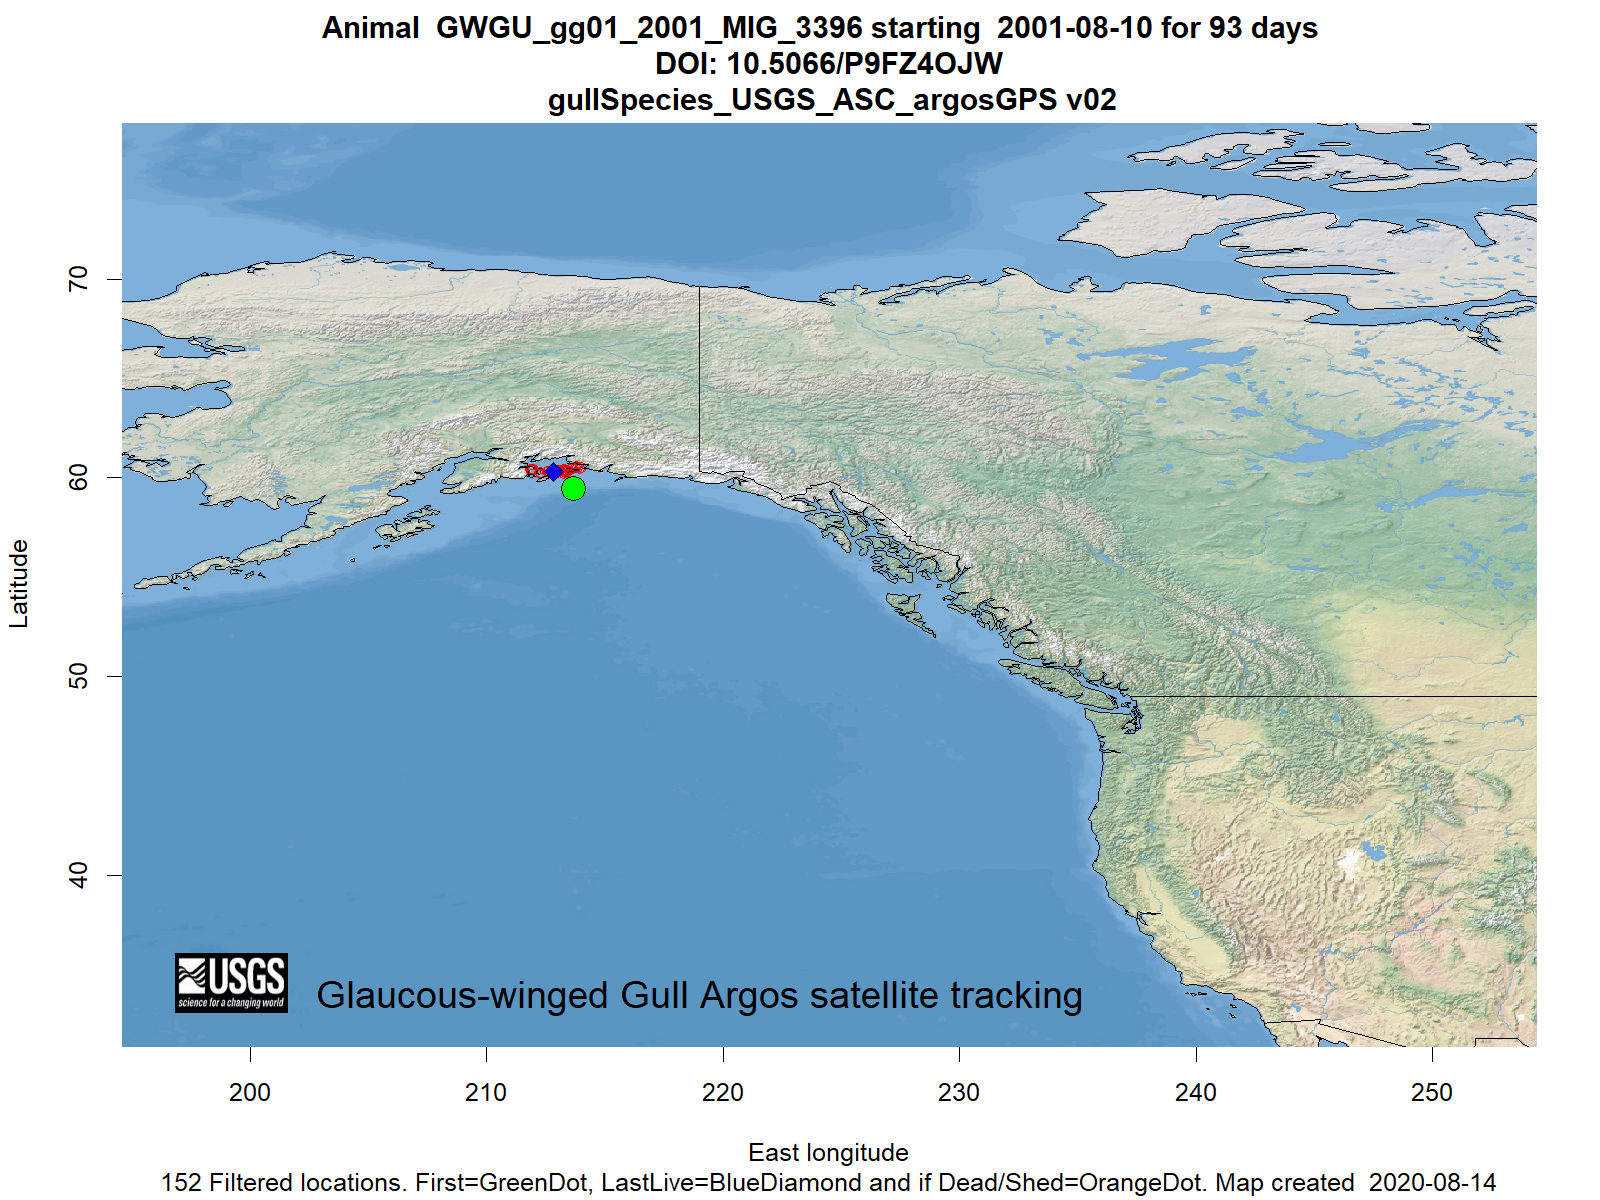 Tracking map for species GWGU_gg01_2001_MIG_3396